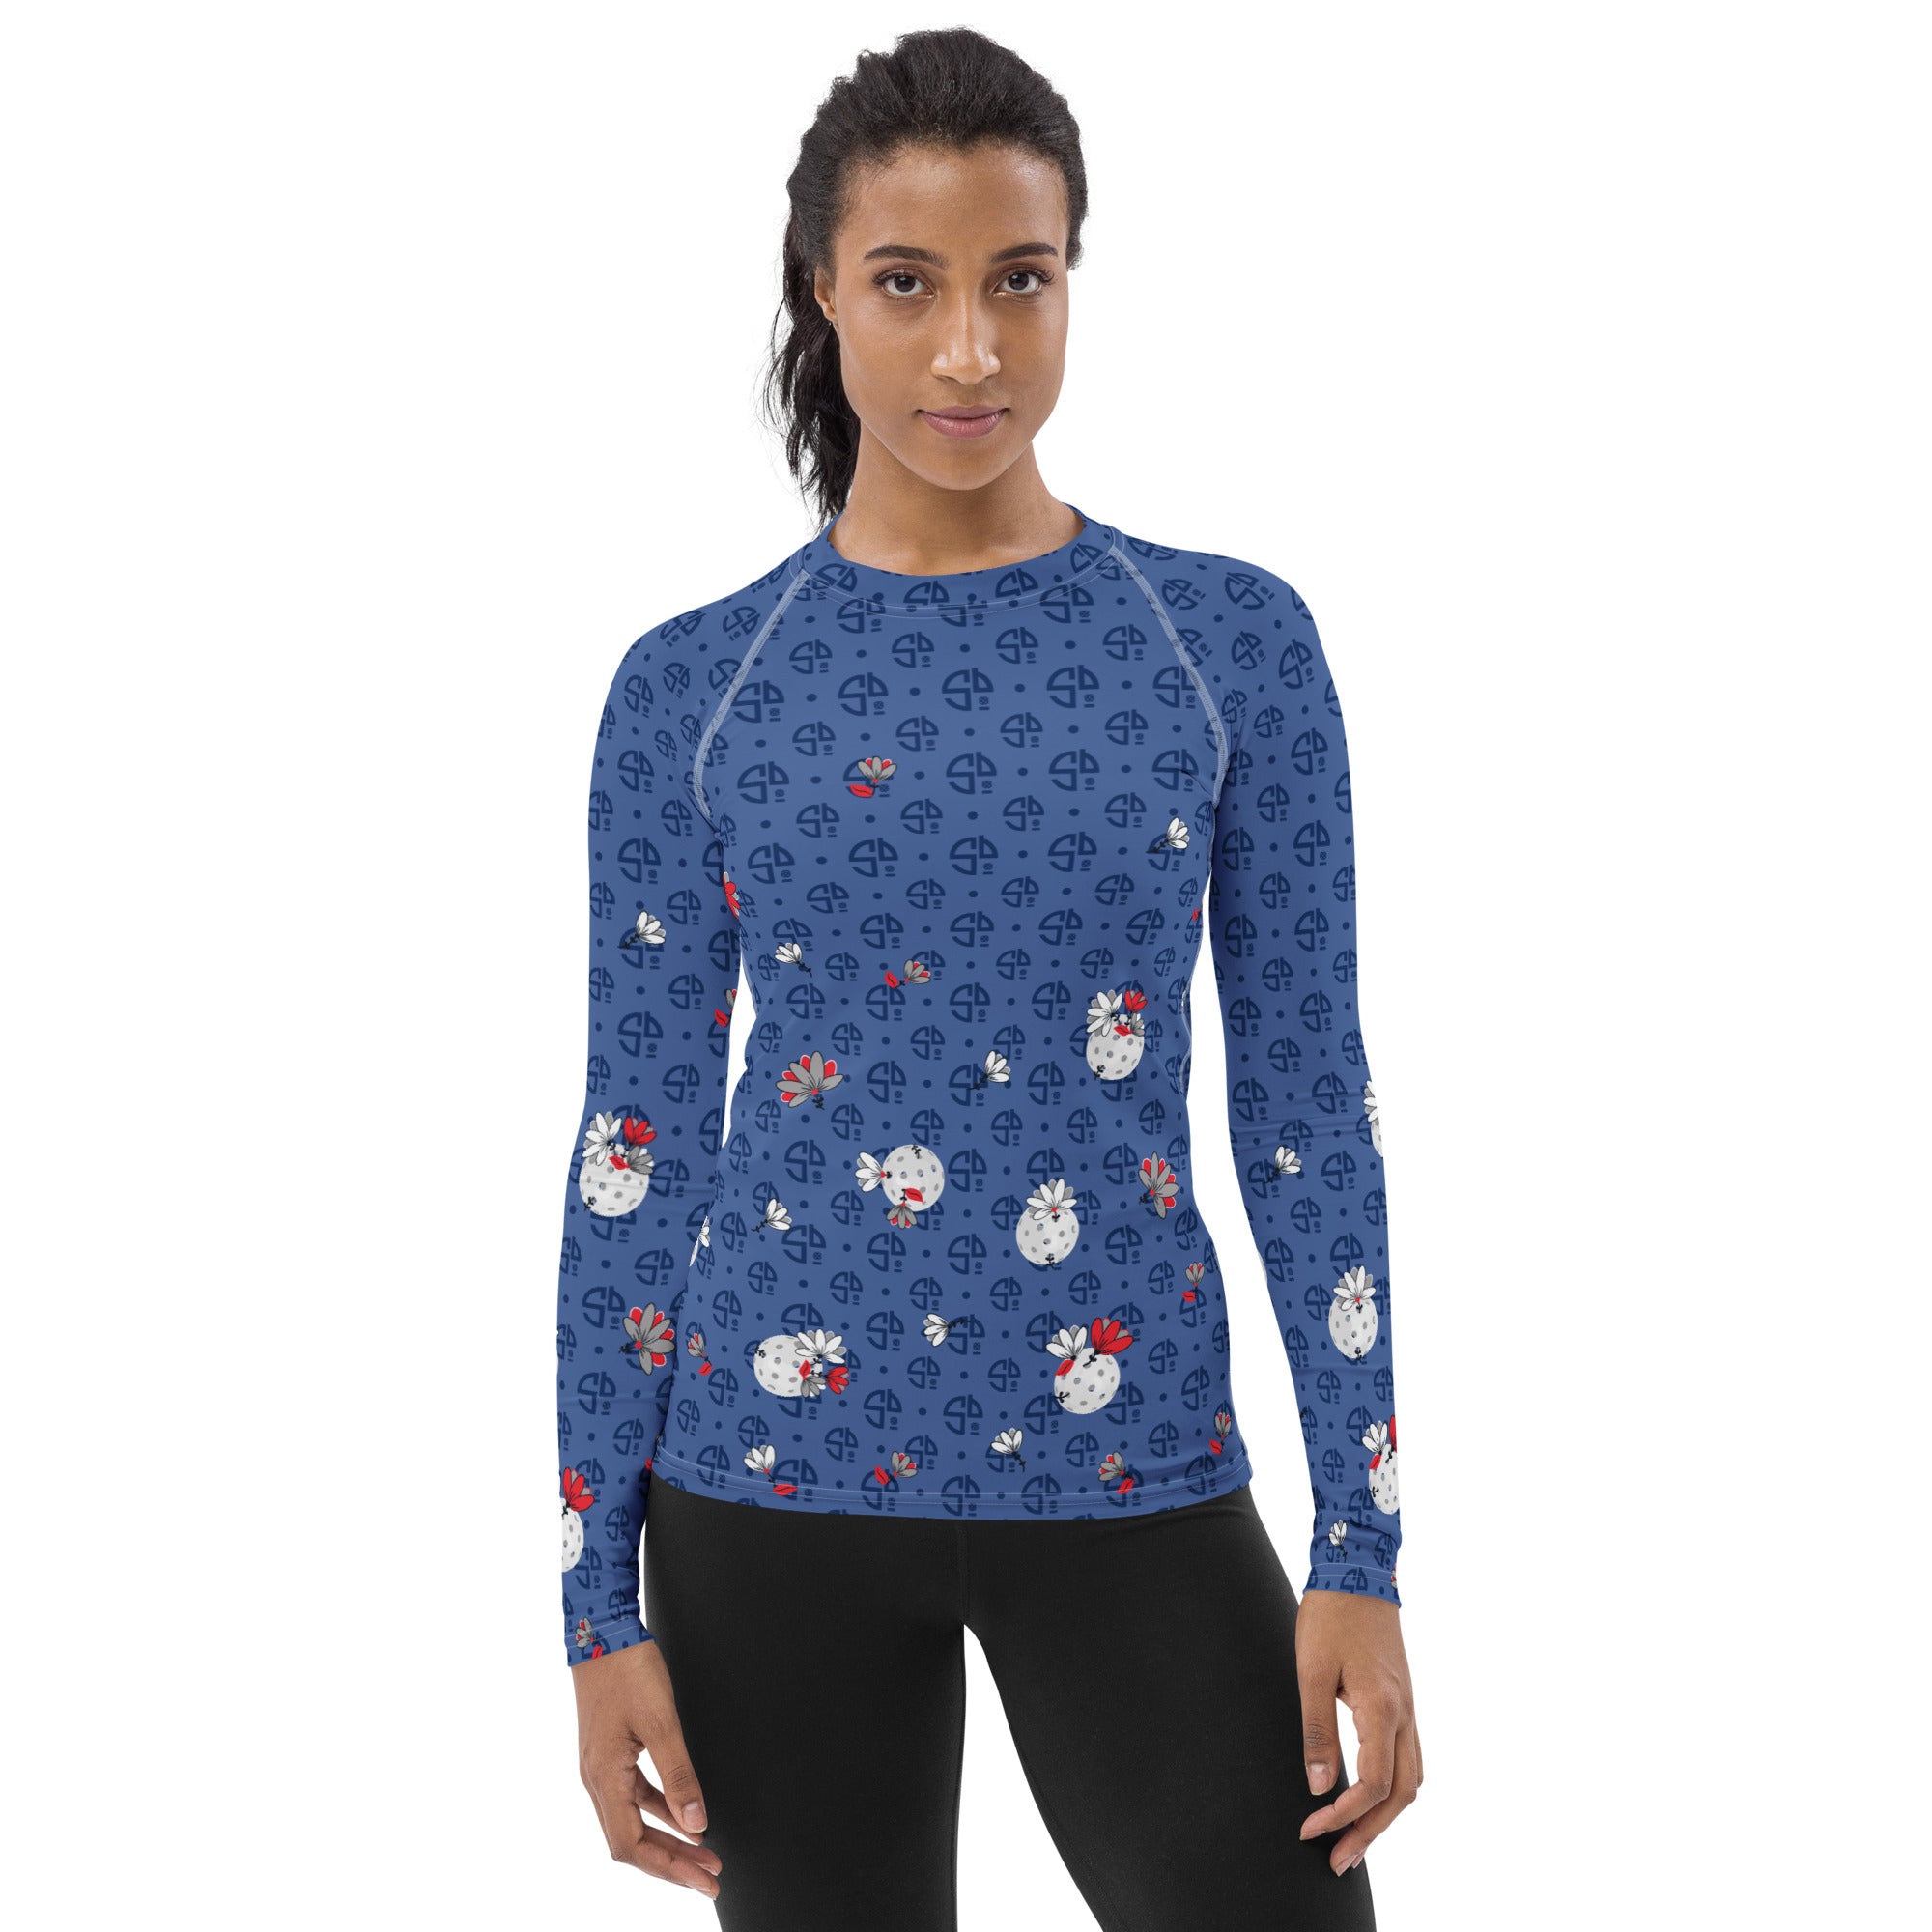 Spring Dink Logo© Gradient Red, White & Blue Women's Performance Long Sleeve Shirt for Pickleball Enthusiasts, UPF 50+